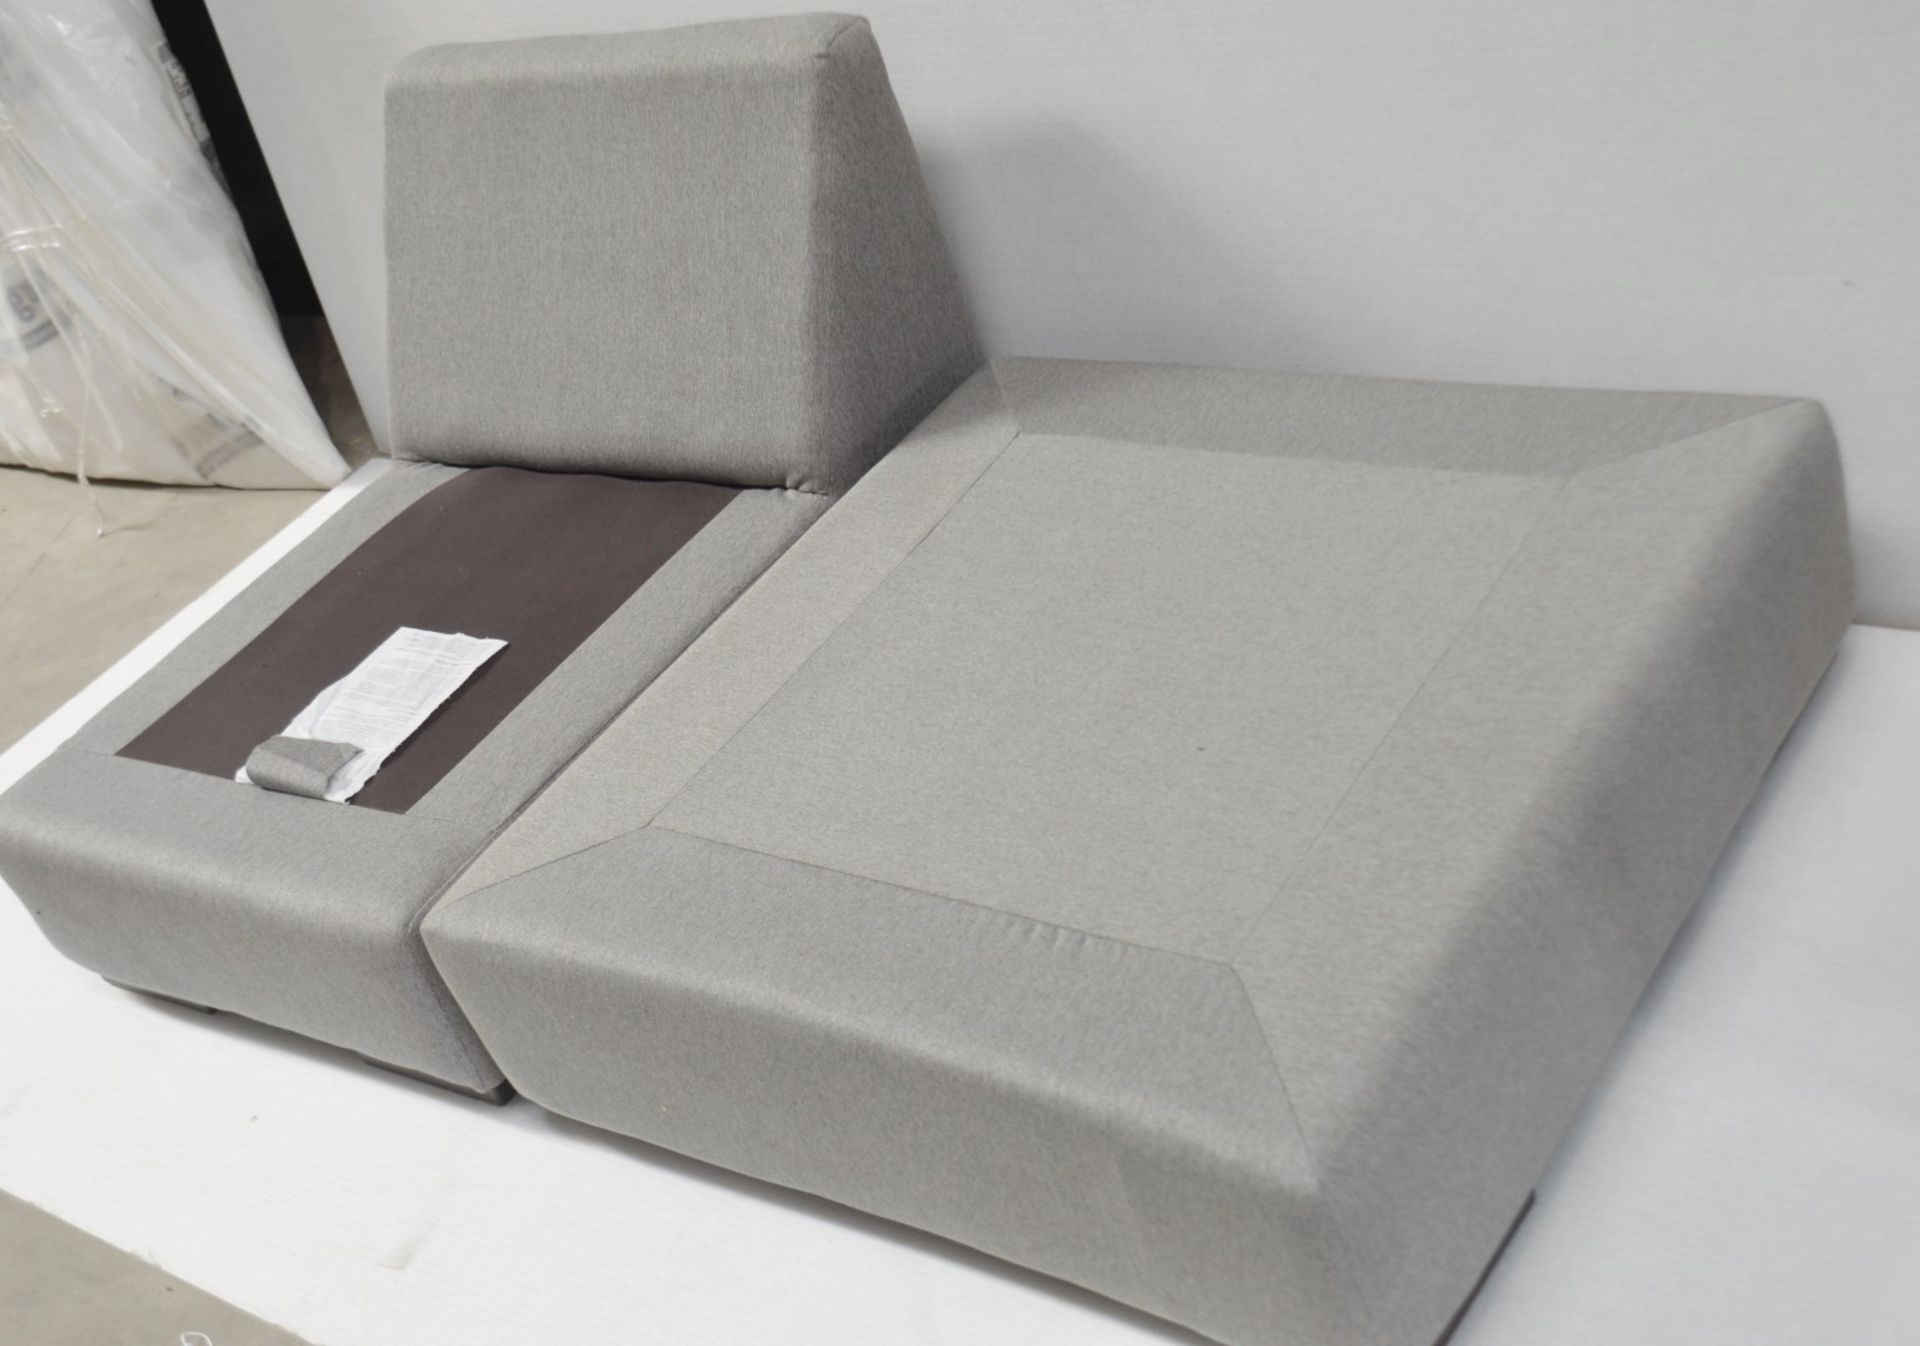 1 x Modular Chaise Lounge Upholstered In A Light Grey Fabric - Dimensions: D90 x L160 x H66cm / Seat - Image 2 of 8